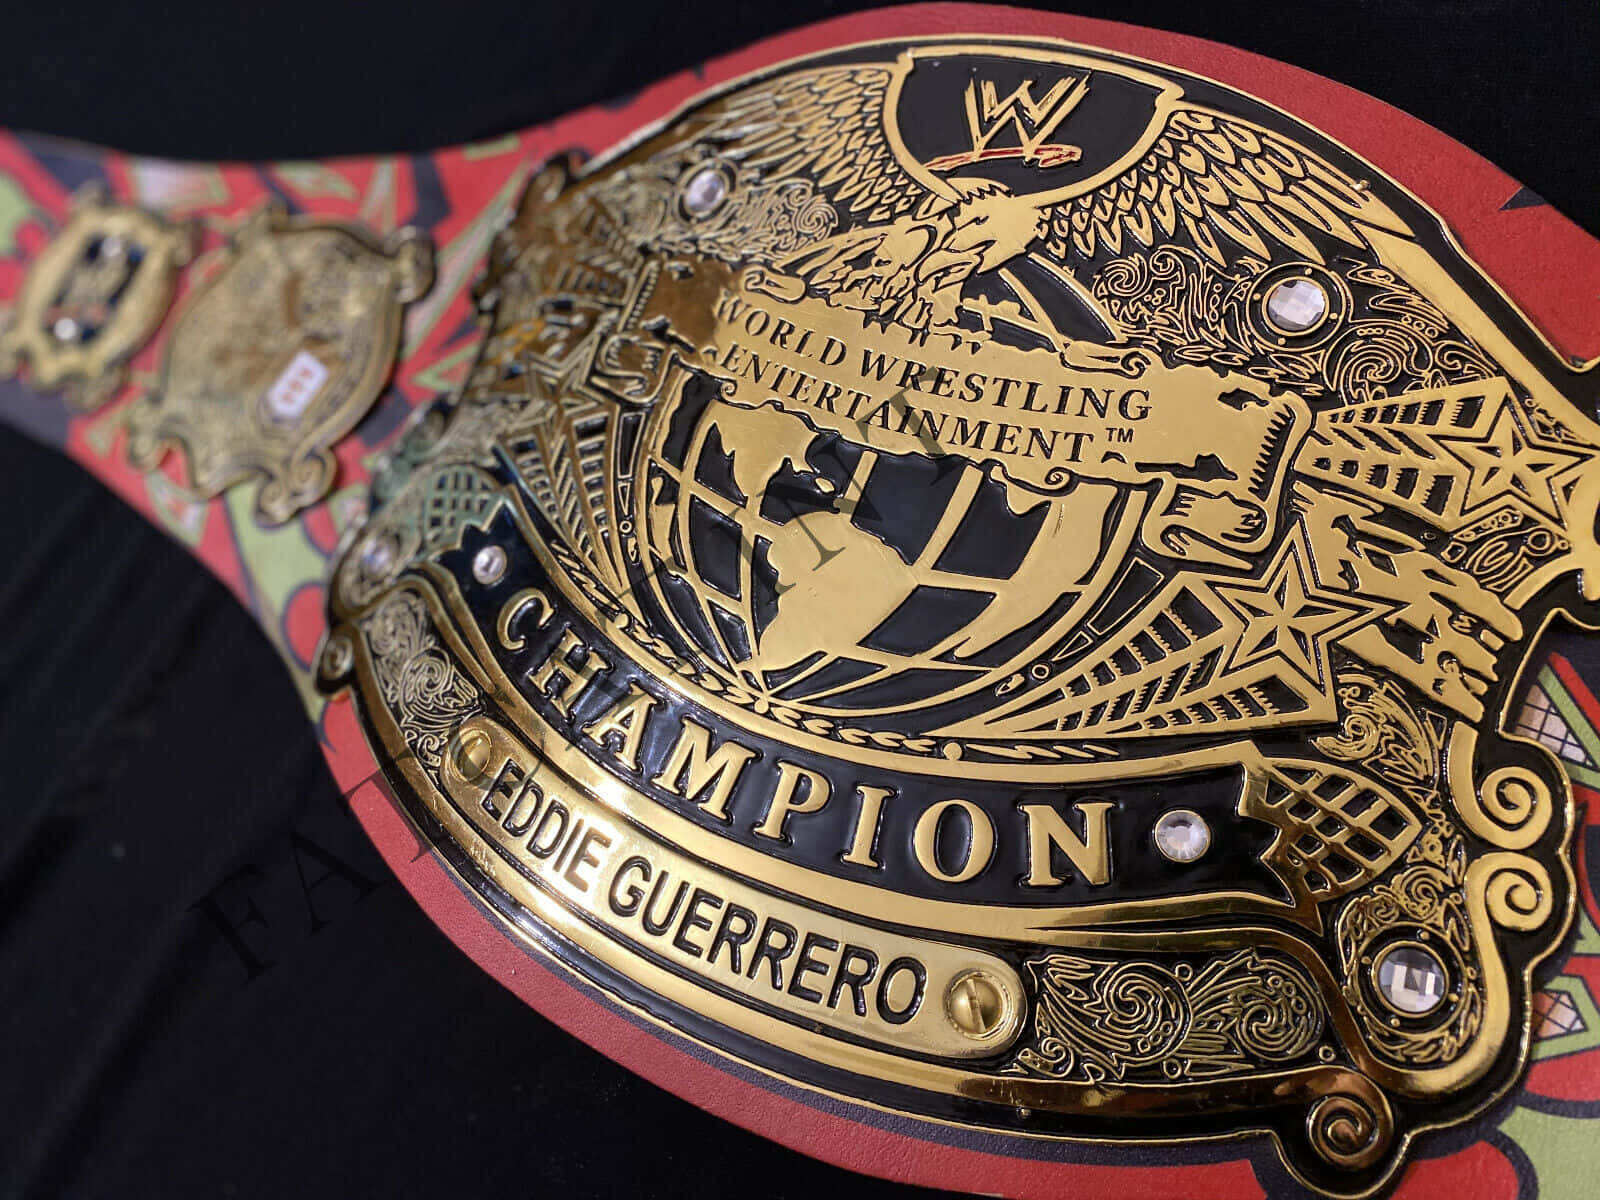 wwe undisputed championship drawing